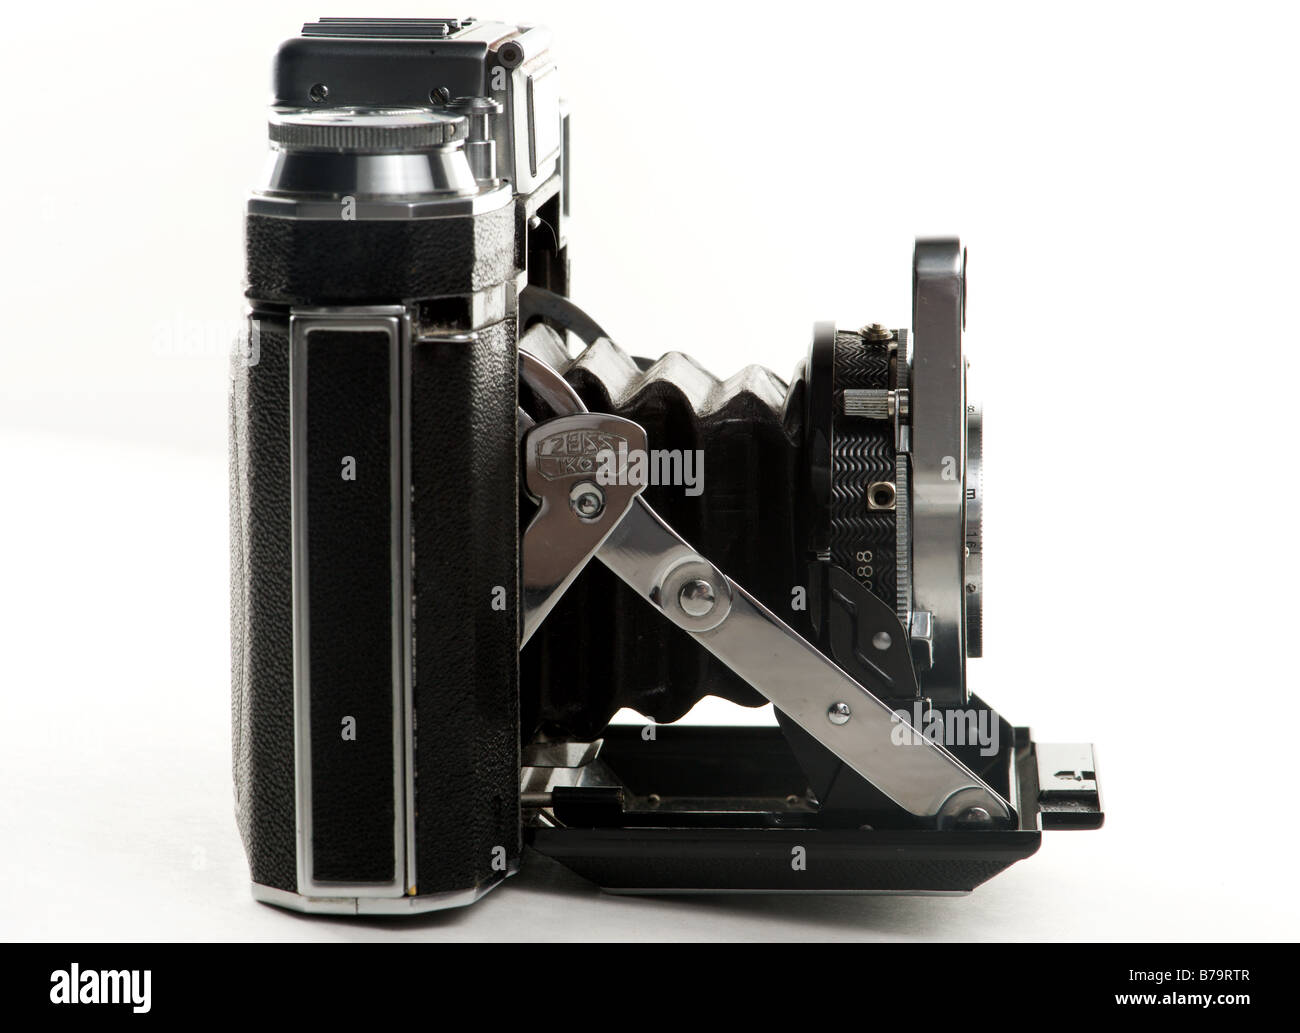 Profile view of an old fold out Zeiss Camera Stock Photo